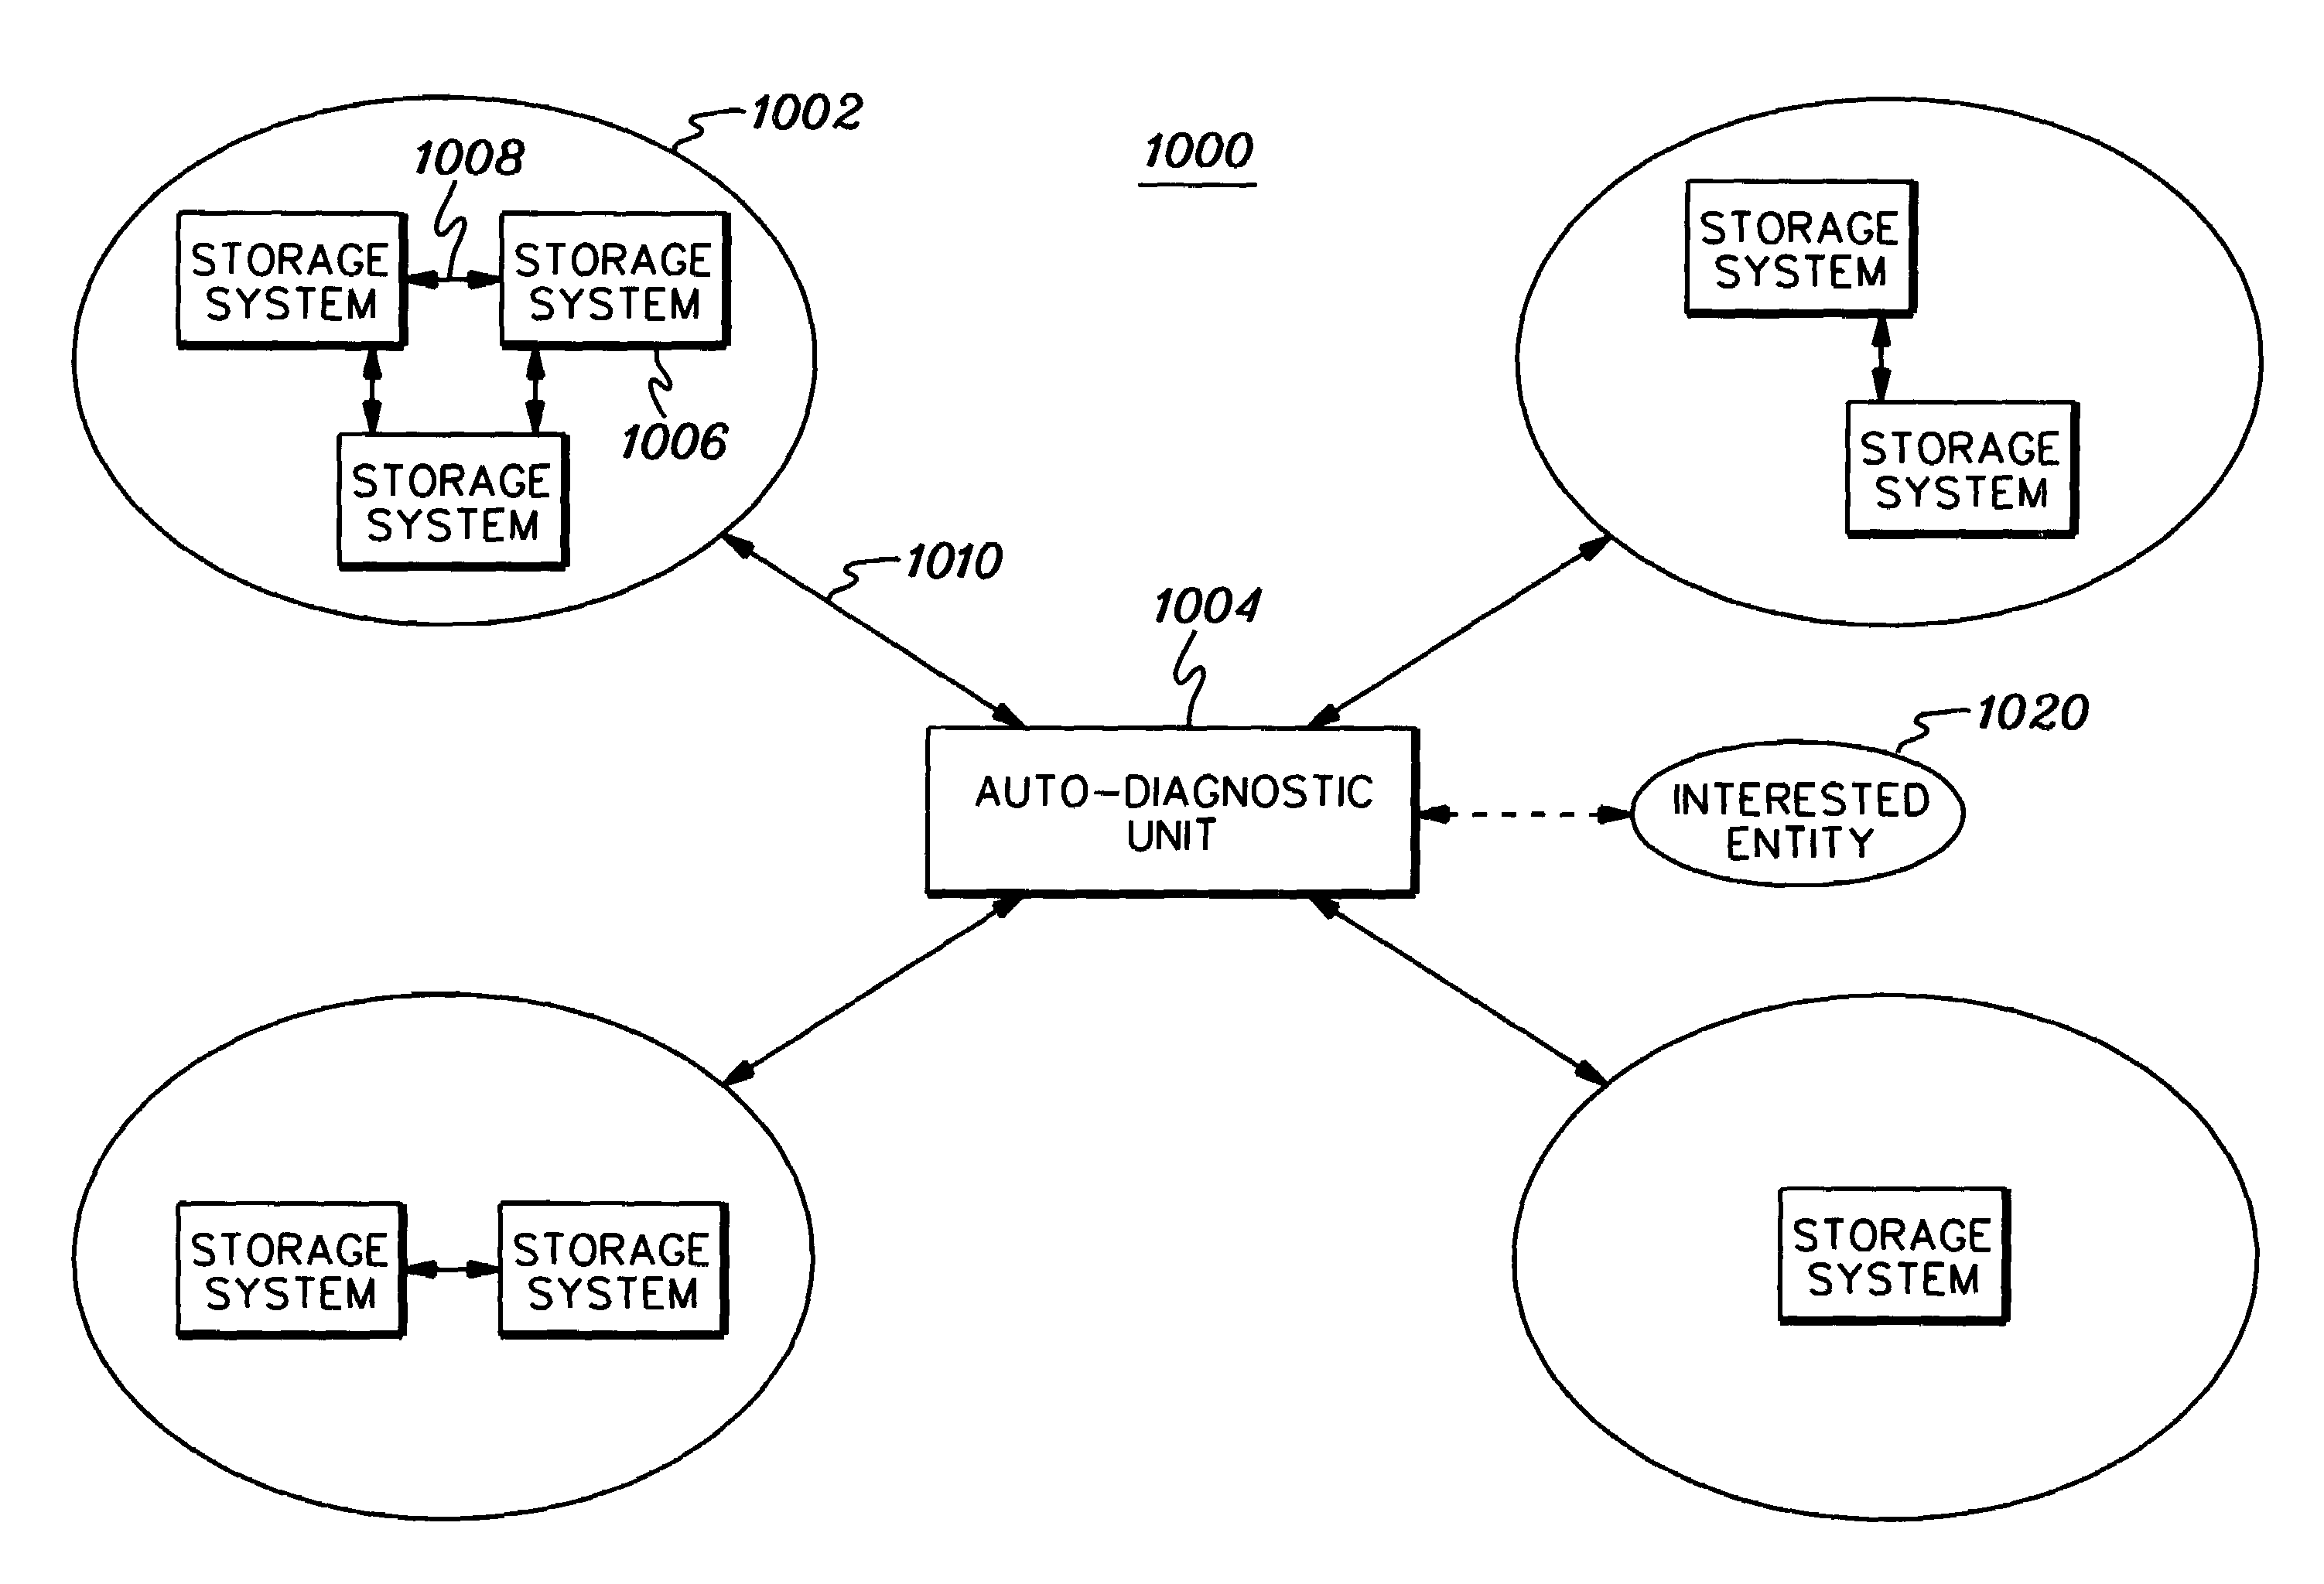 Automatic collection and dissemination of product usage information